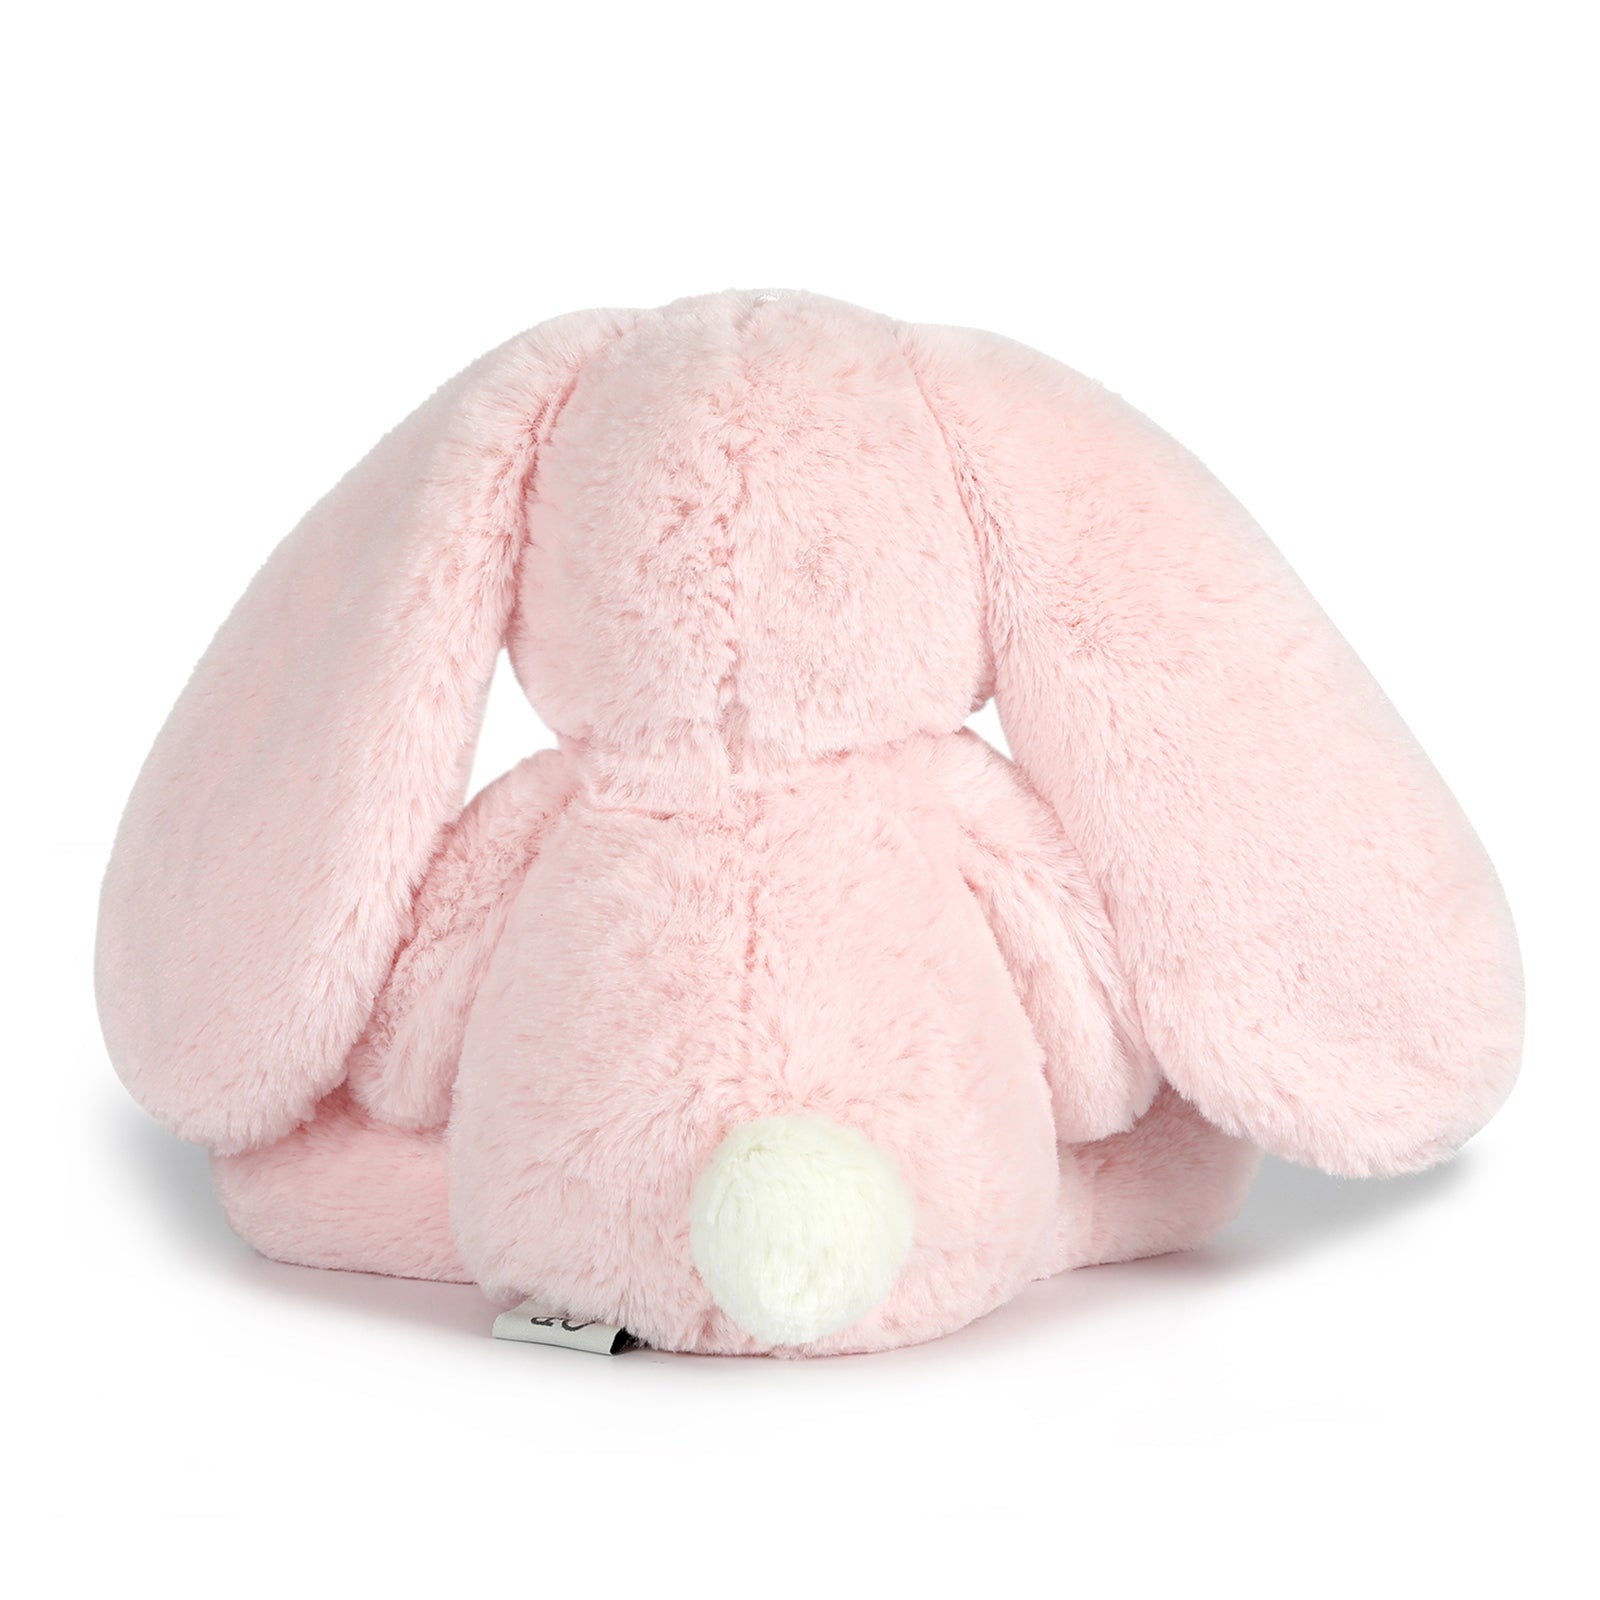 Stuffed Animals Plush Toys Bunny Pink - Betsy Bunny Huggie ages 0+ 